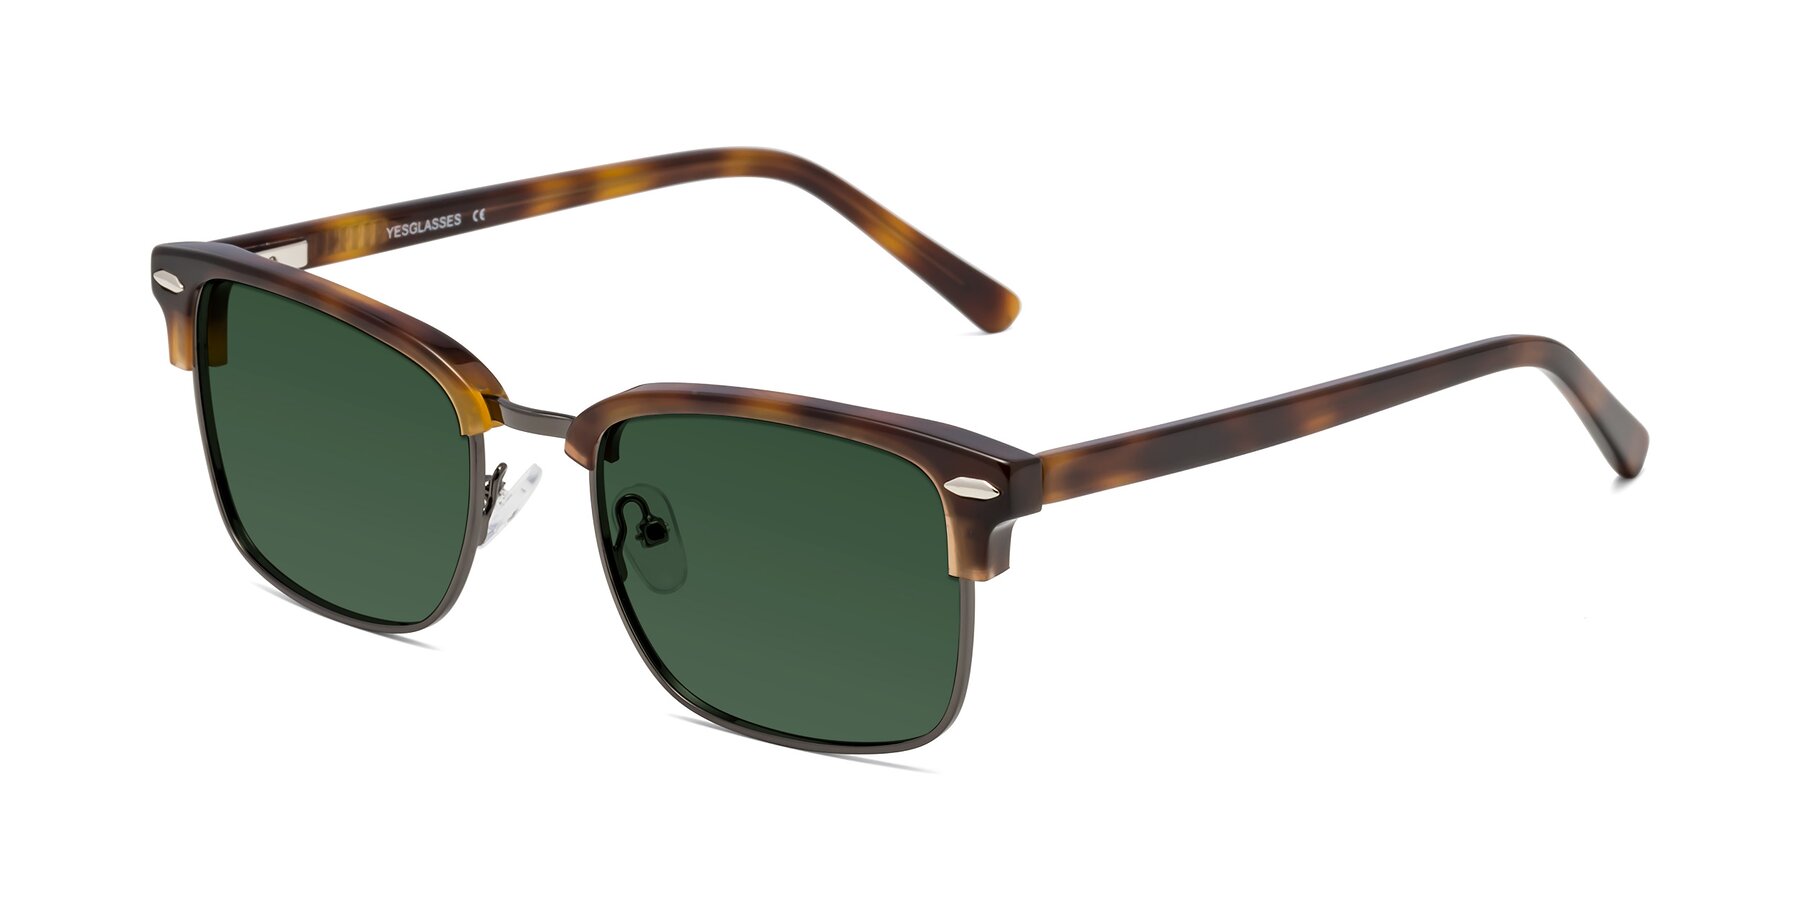 Angle of 17464 in Tortoise/ Gunmetal with Green Tinted Lenses